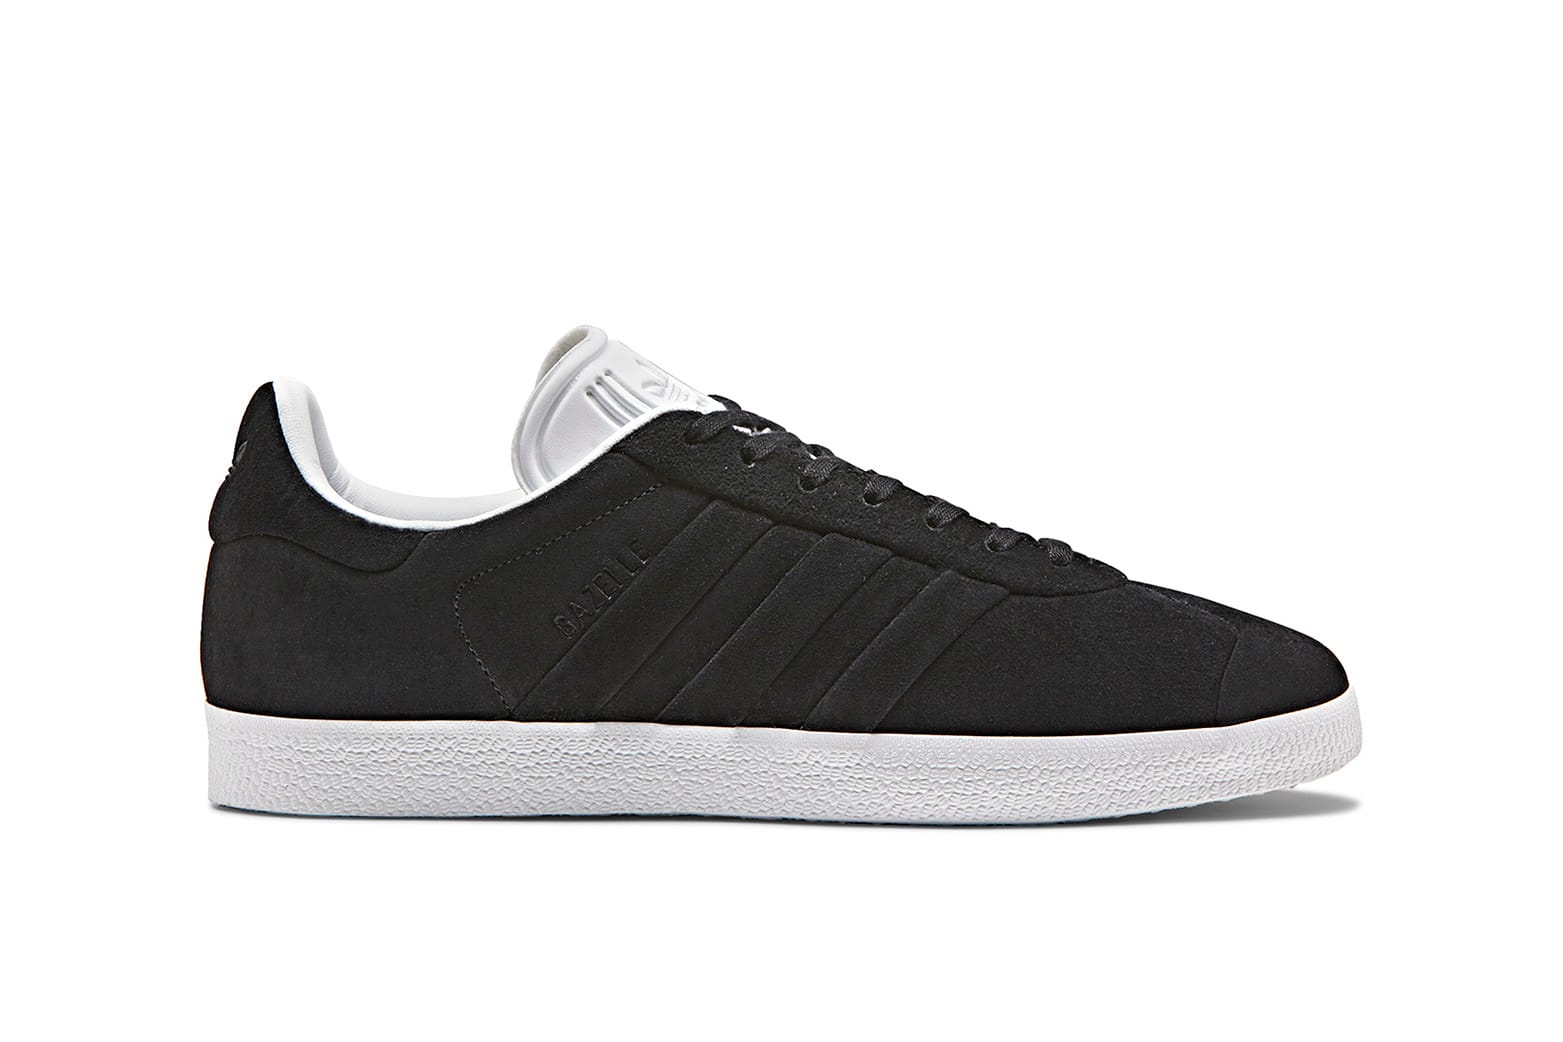 adidas campus and gazelle difference